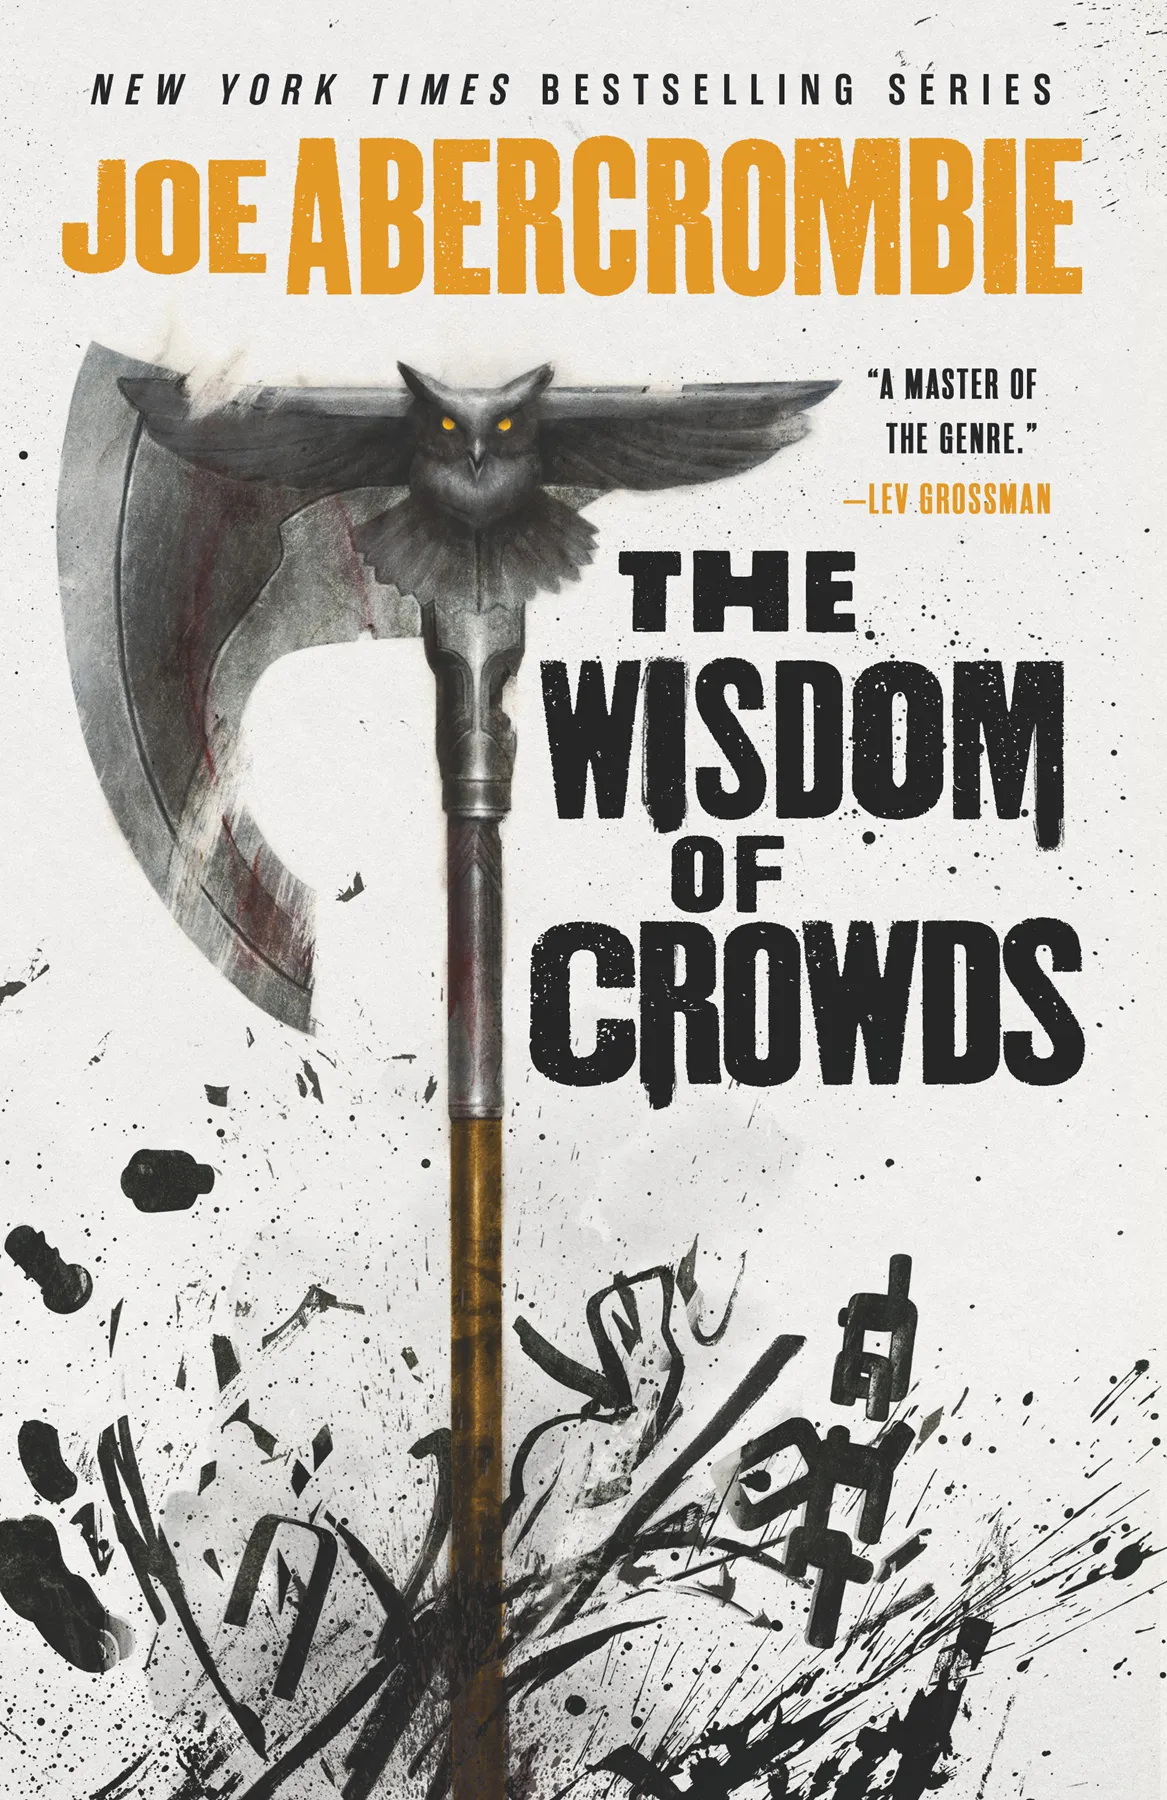 The Wisdom of Crowds (The Age of Madness #3) (The First Law #10)